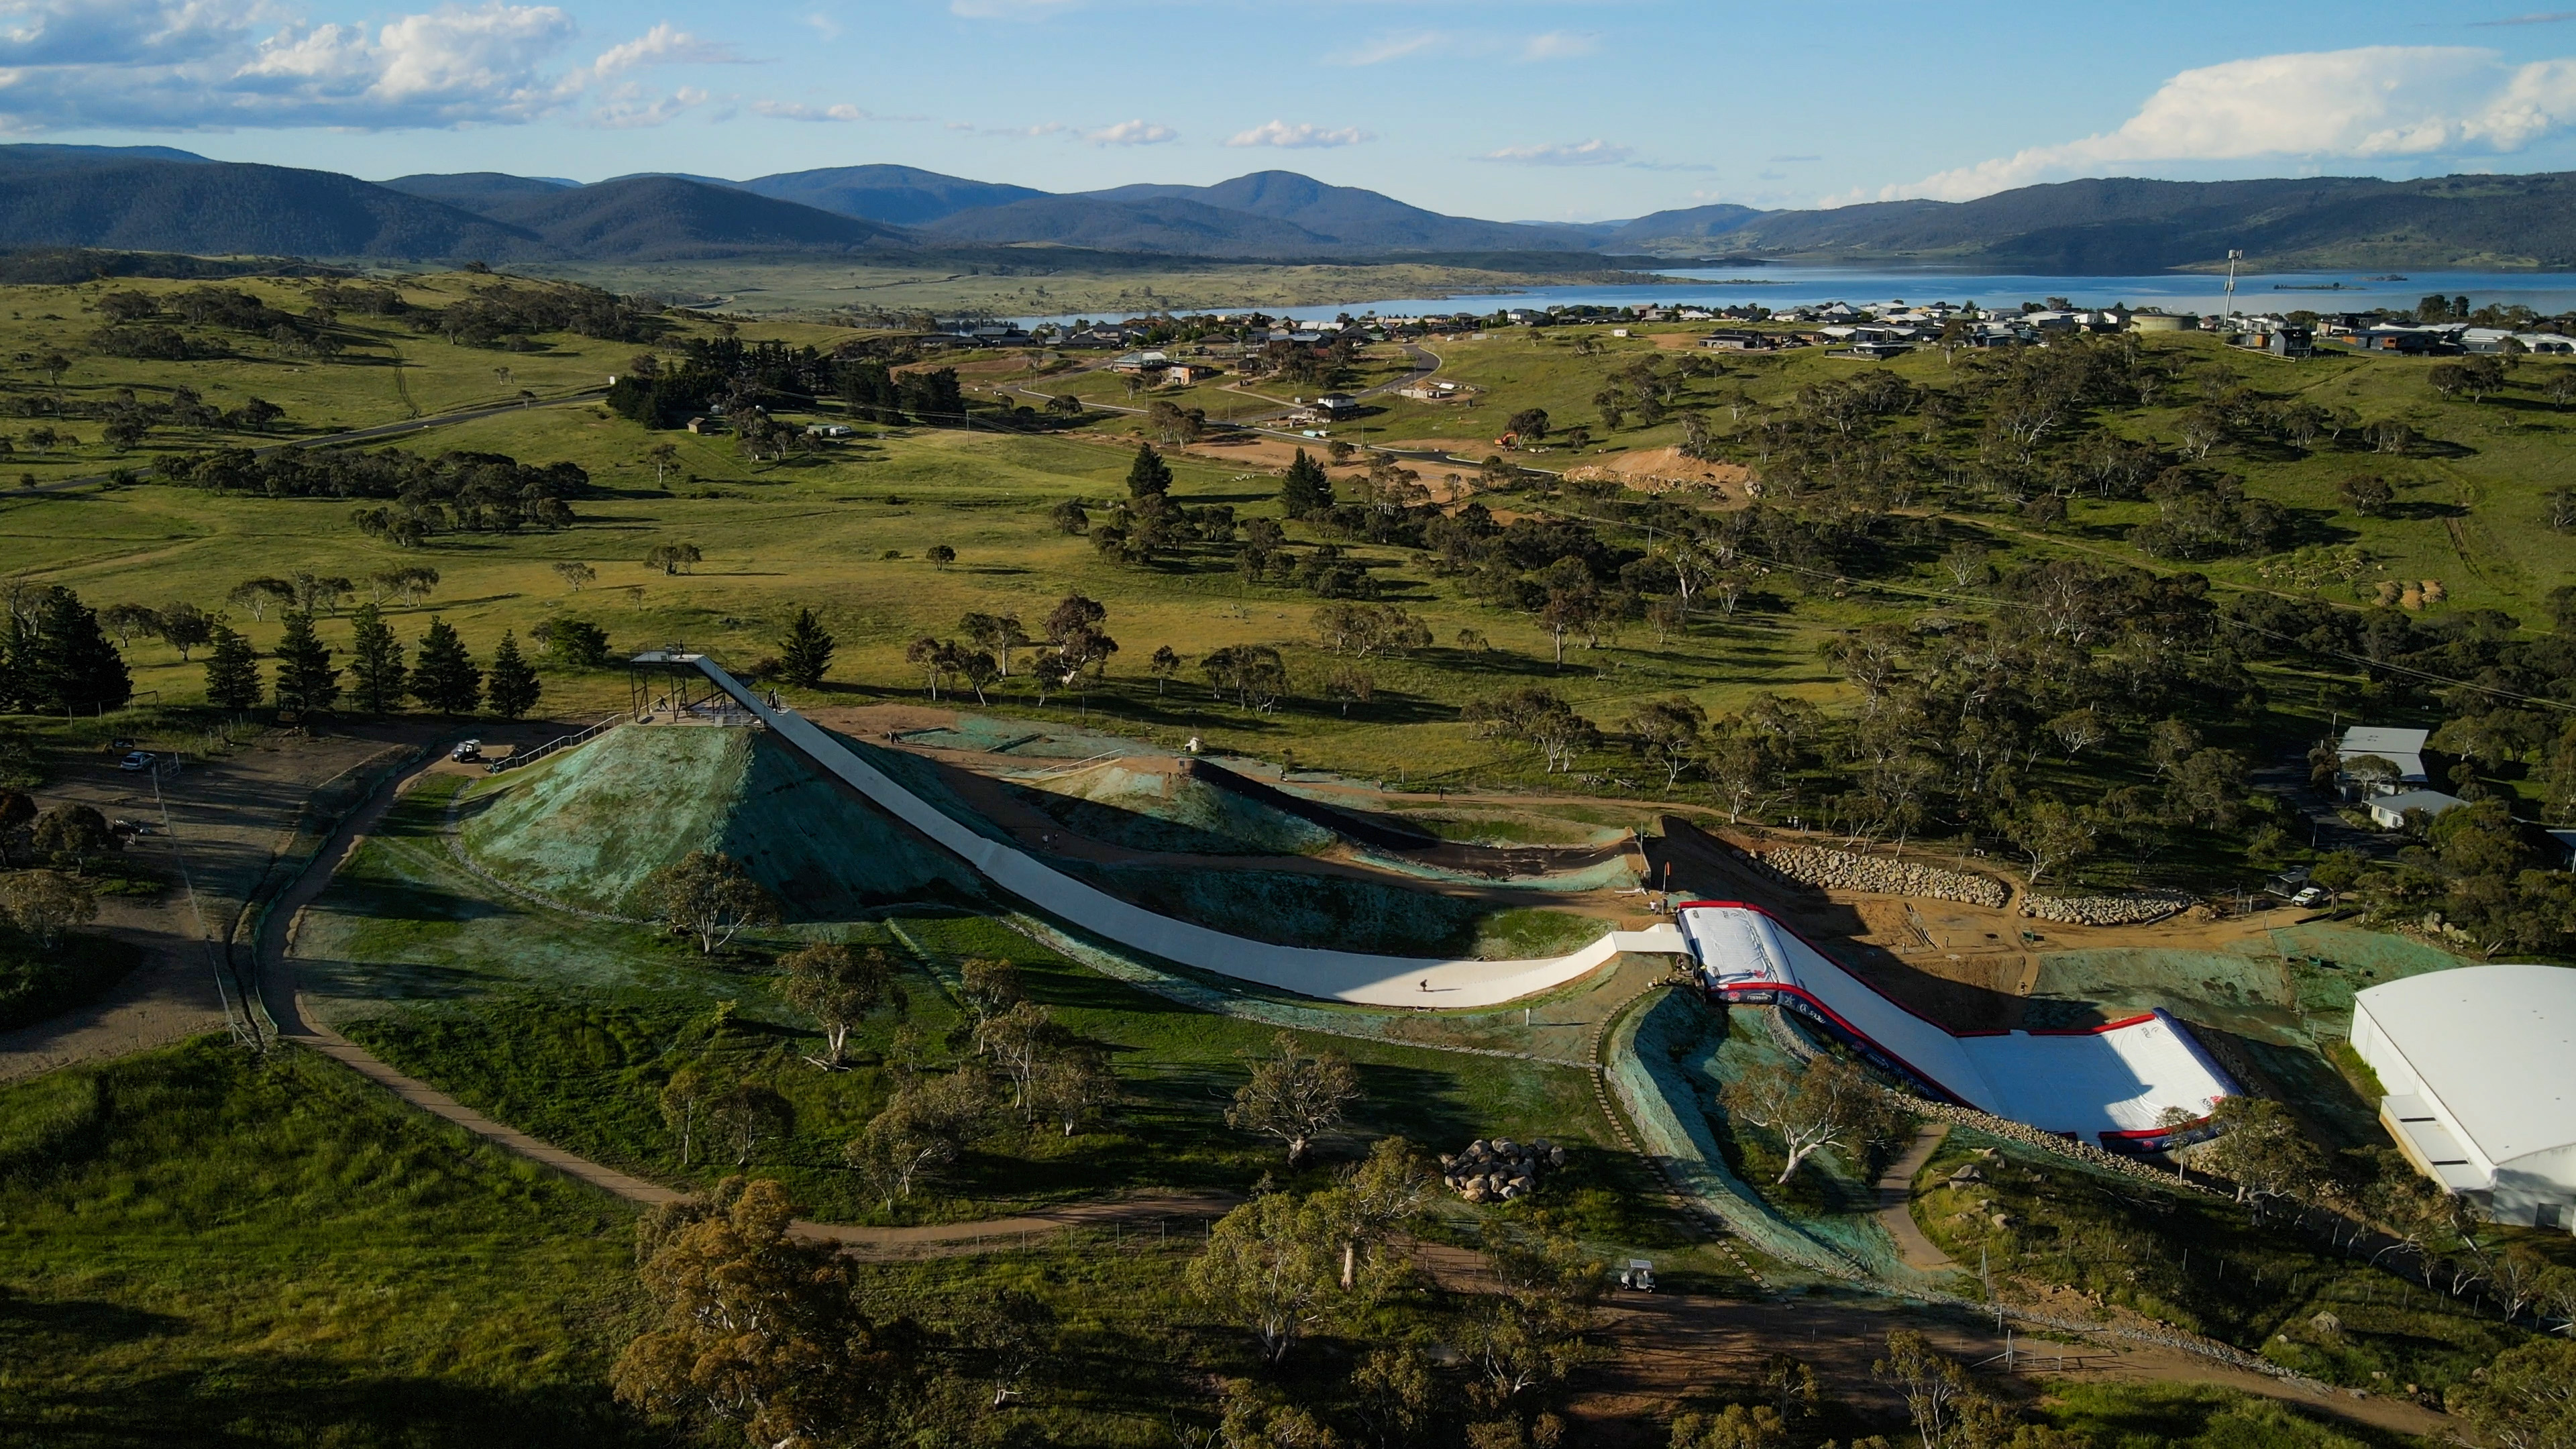 Snow Australia received a grant for rubberised flooring and gym equipment for National Snowsports Training Centre in Jindabyne